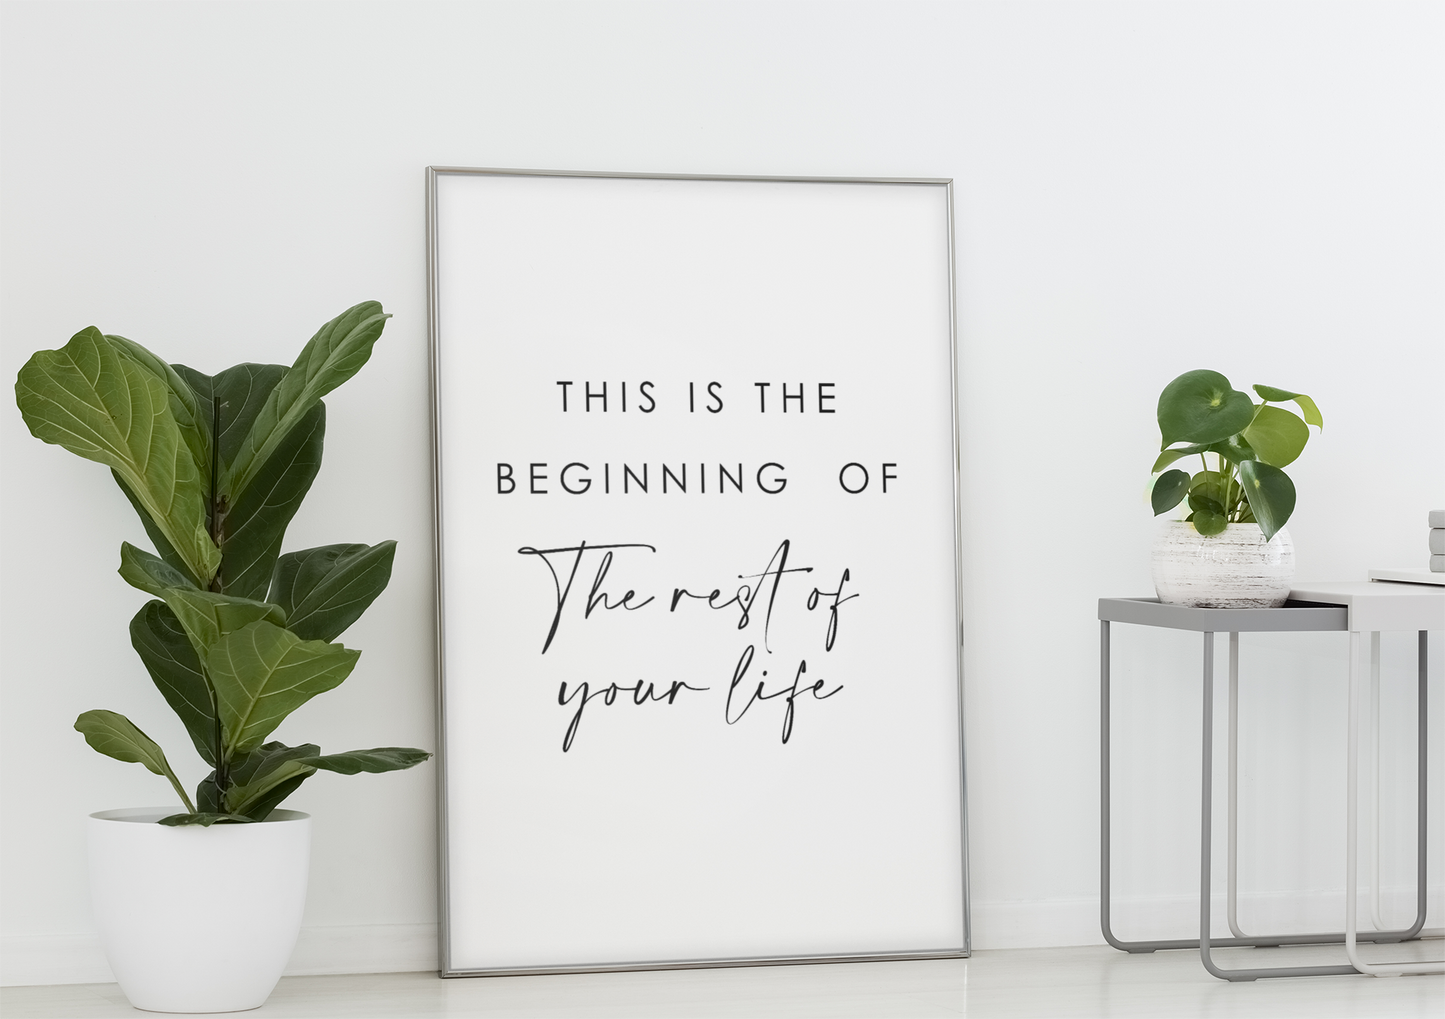 "This is the beginning of the rest of your life" (White background)